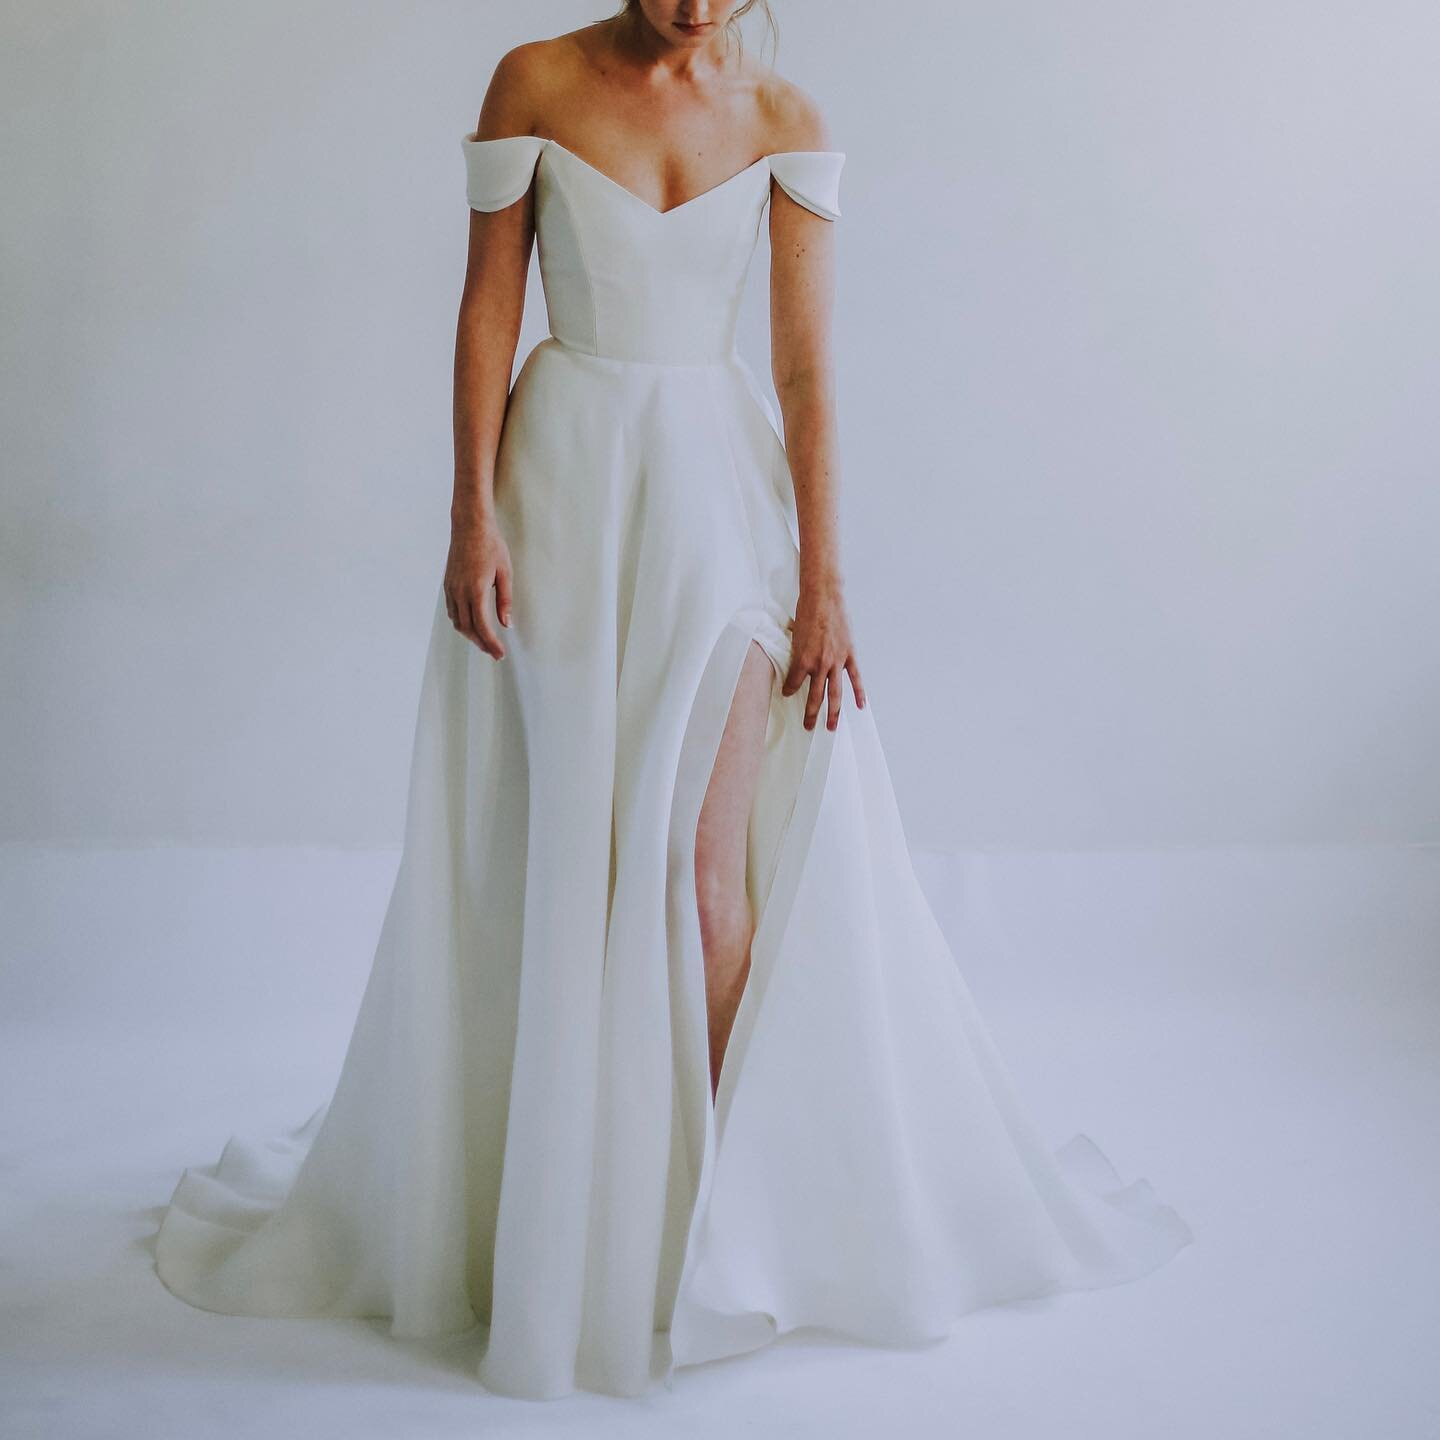 baby, you're so classic ✨ meet Eliza, the newest arrival from @leannemarshallofficial 🤍 this silk gazaar gown has a supportive structured bodice with petaled off-the-shoulder sleeves for an effortless + timeless look 🌹